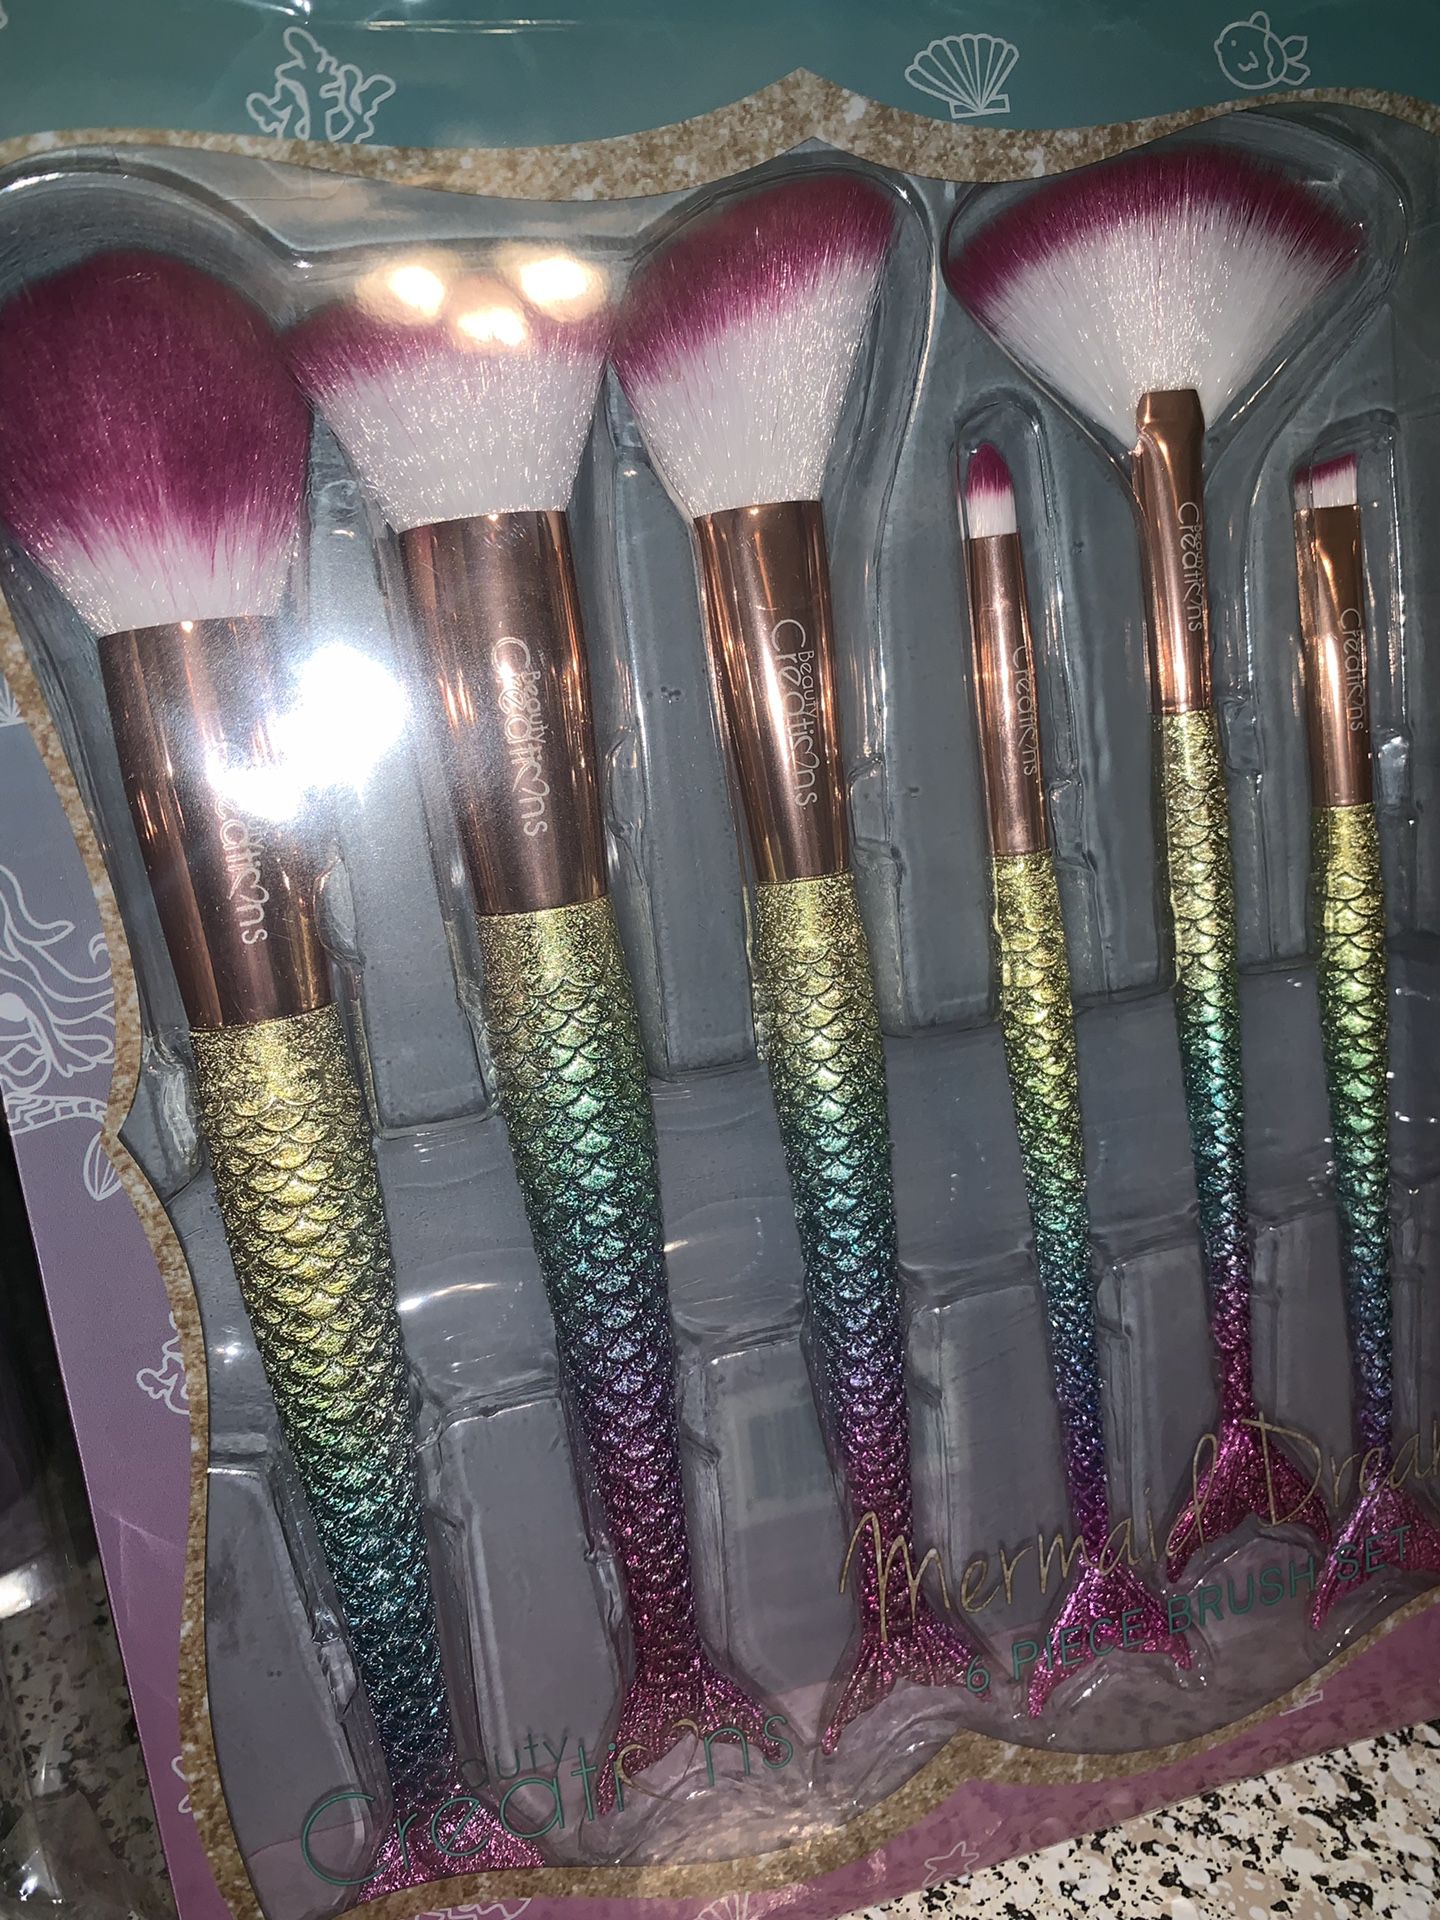 Makeup brushes new